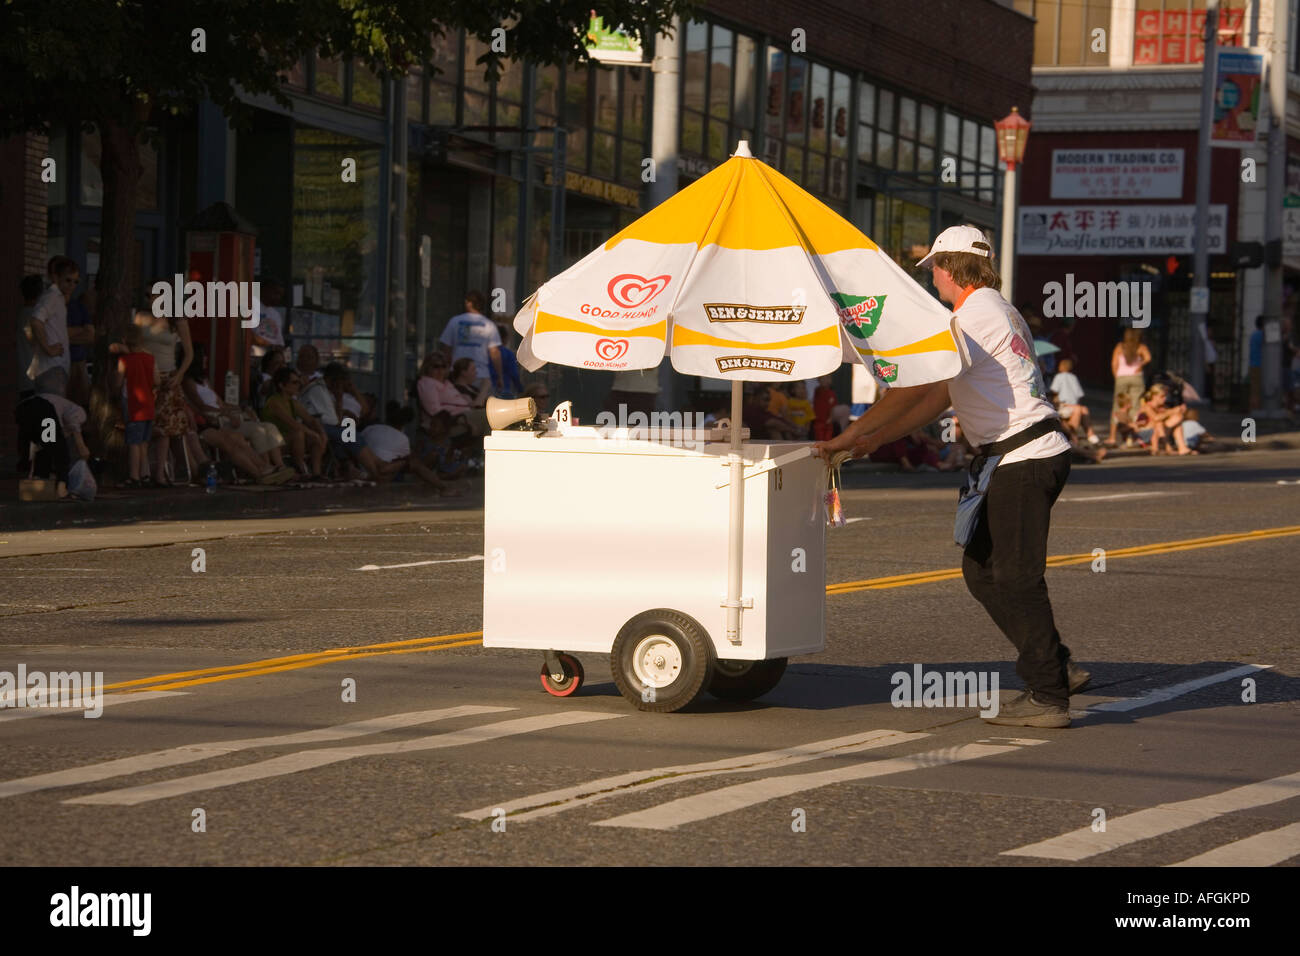 Street ice cream cart  portable push cart mobile food booth stand for sale